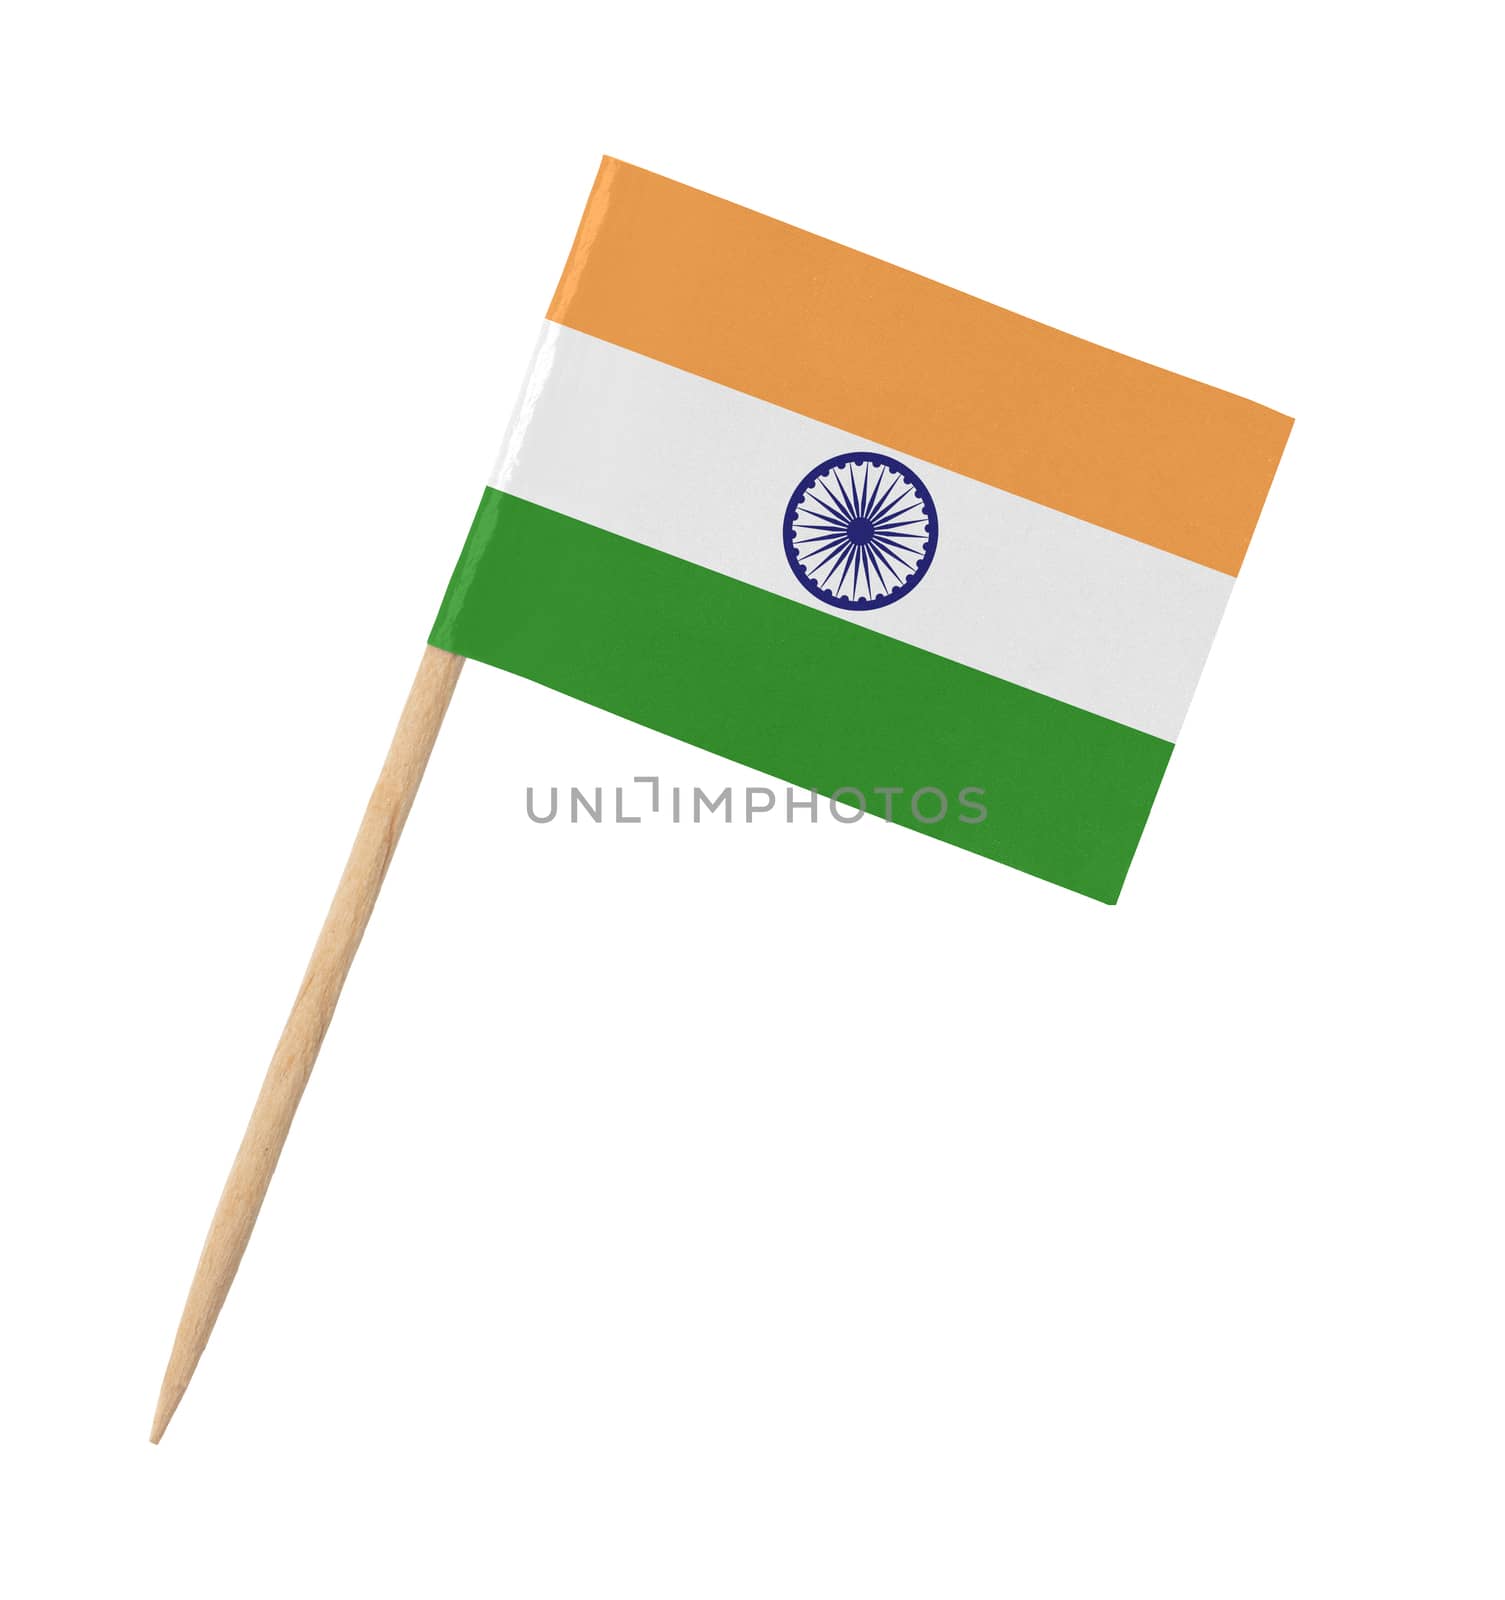 Small paper Indian flag on wooden stick by michaklootwijk